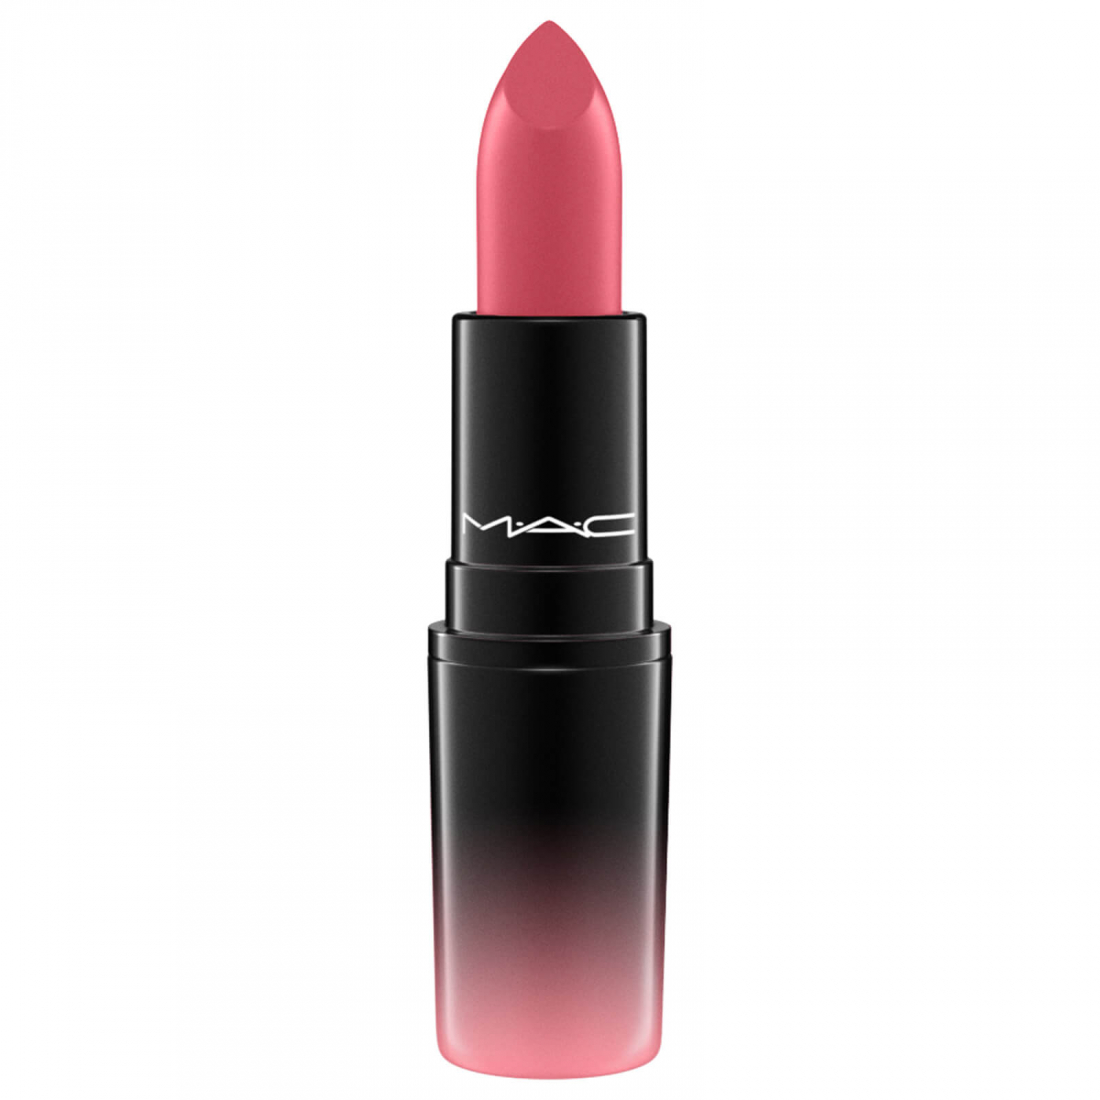 'Love Me' Lippenstift - 407 As If I Care 3 g